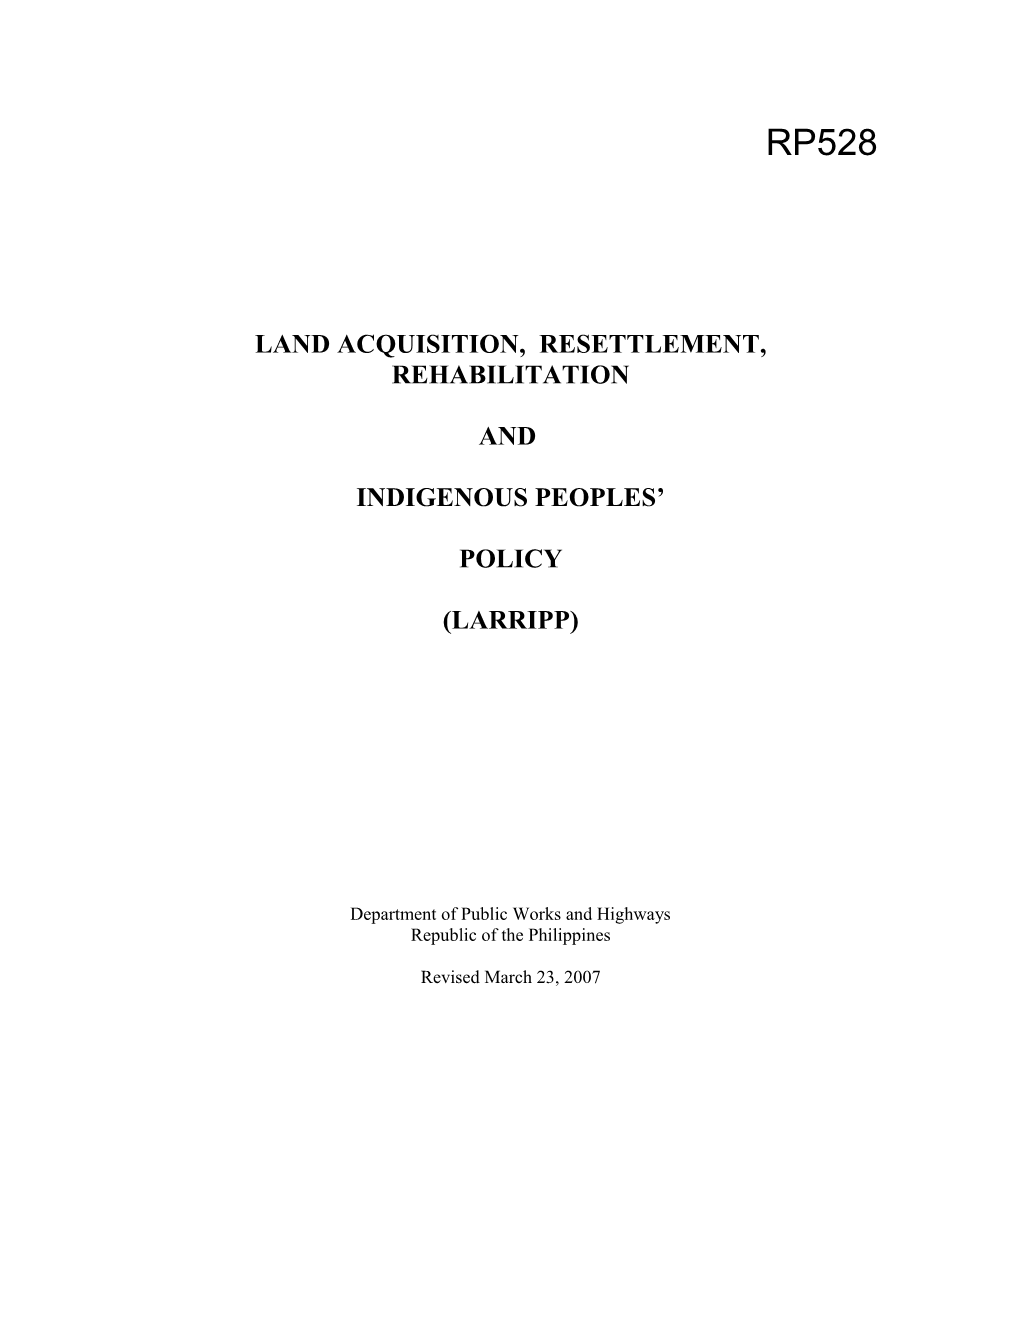 Land Acquisition, Resettlement, Rehabilitation and Indigenous Peoples Policy, 3Rd Edition (2007)